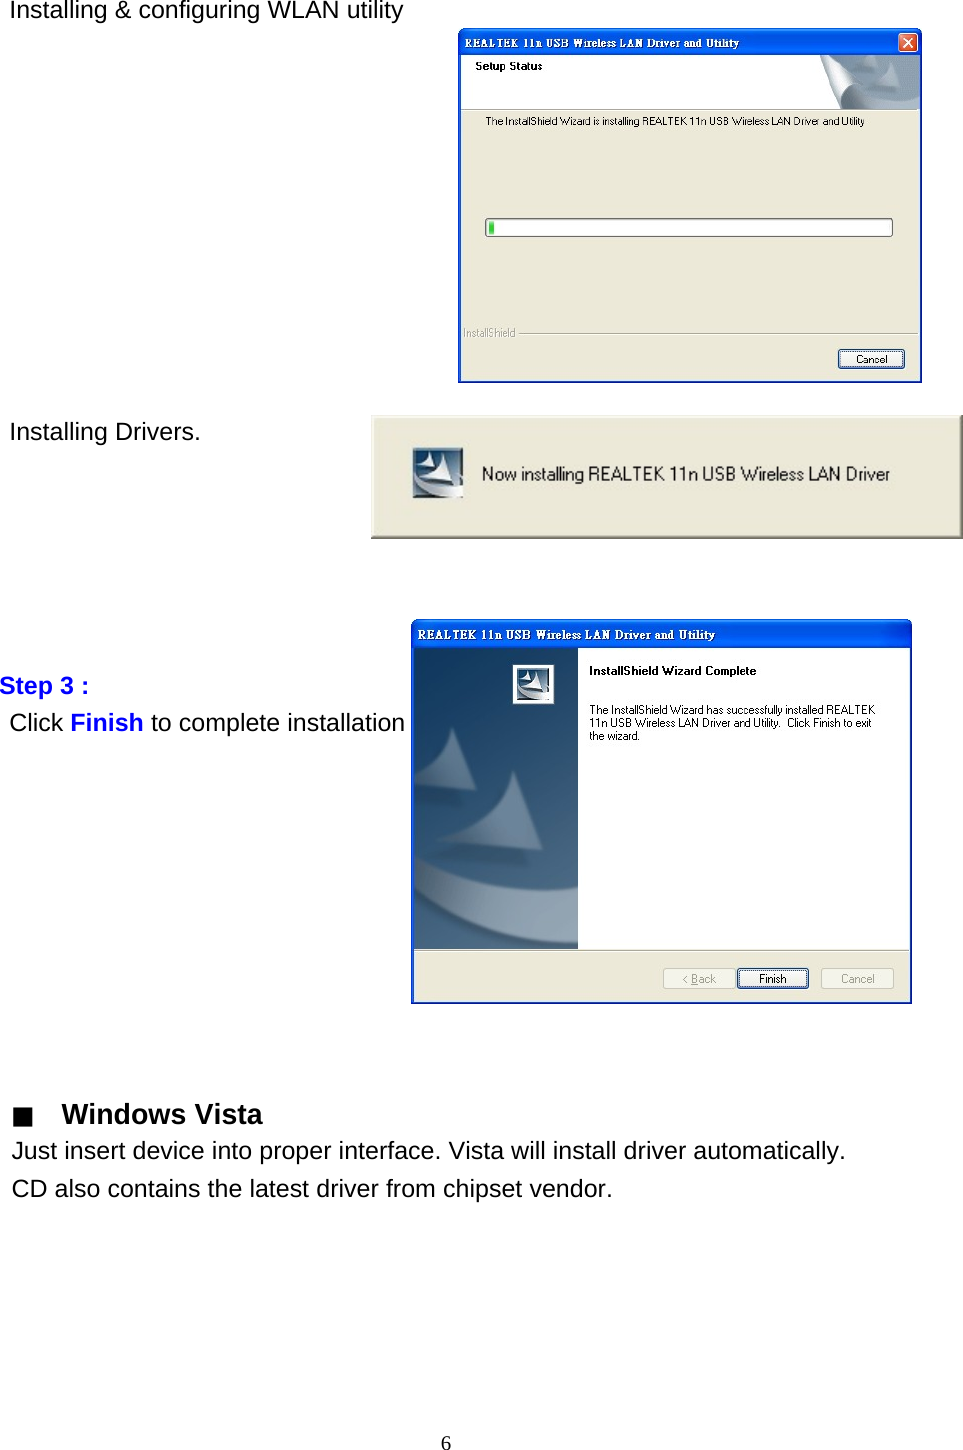 6    Installing &amp; configuring WLAN utility                 Installing Drivers.             Step 3 : Click Finish to complete installation                    ▓ Windows Vista Just insert device into proper interface. Vista will install driver automatically. CD also contains the latest driver from chipset vendor. 